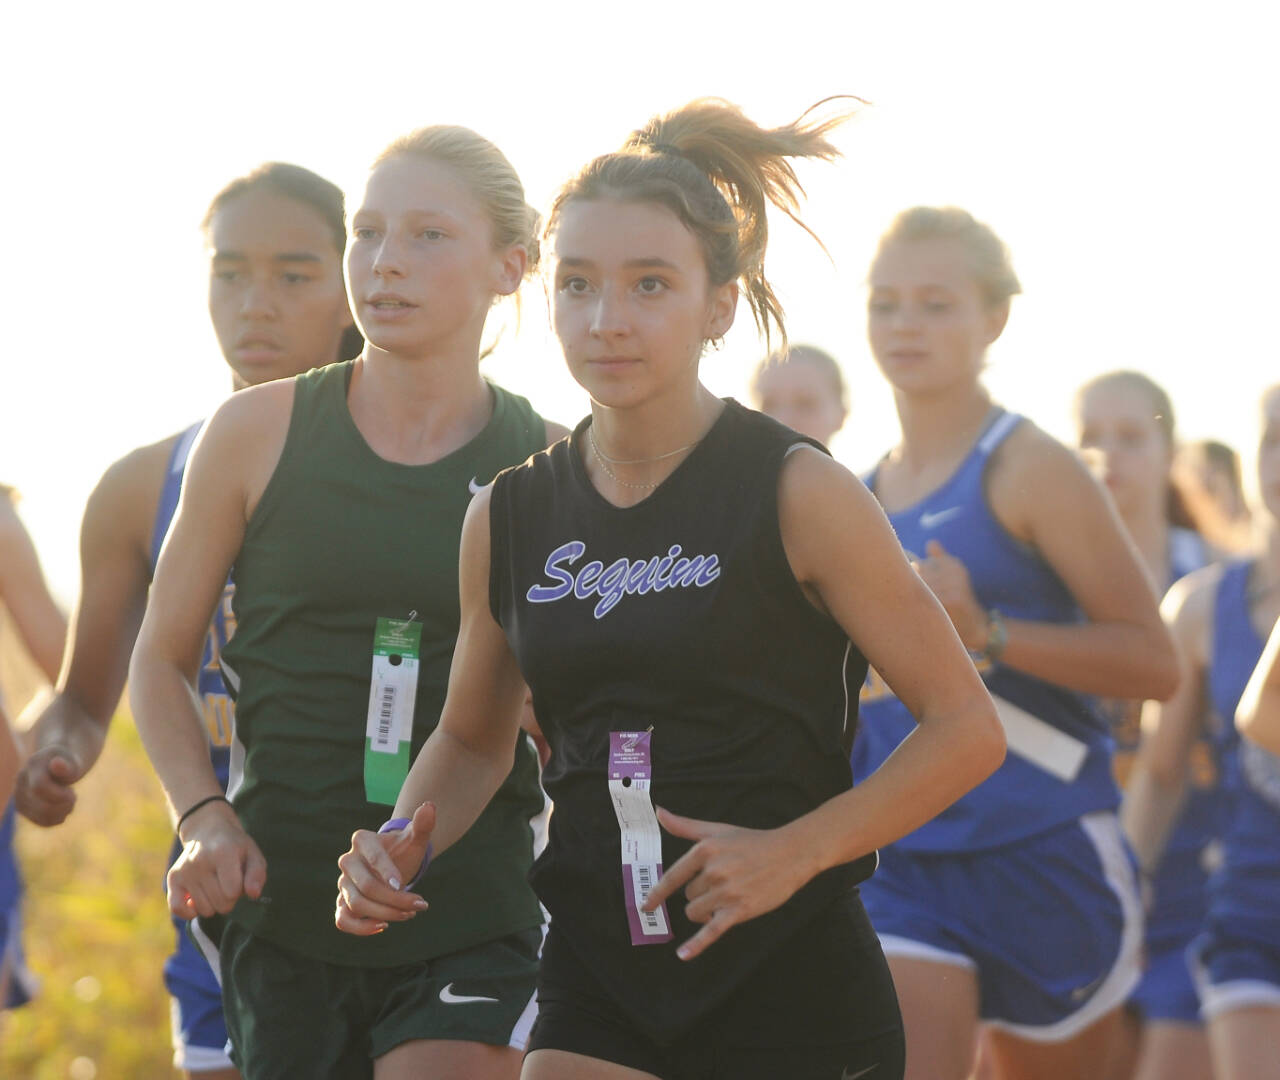 Sequim Gazette photo by Michael Dashiell / Sequim’s Kaitlin Bloomenrader races at an Olympic League meet on Oct. 12 at Voice of America Park in Sequim. Bloomenrader was fourth in the meet (21:04). Port Angeles freshman Leia Larson, left, was 10th.